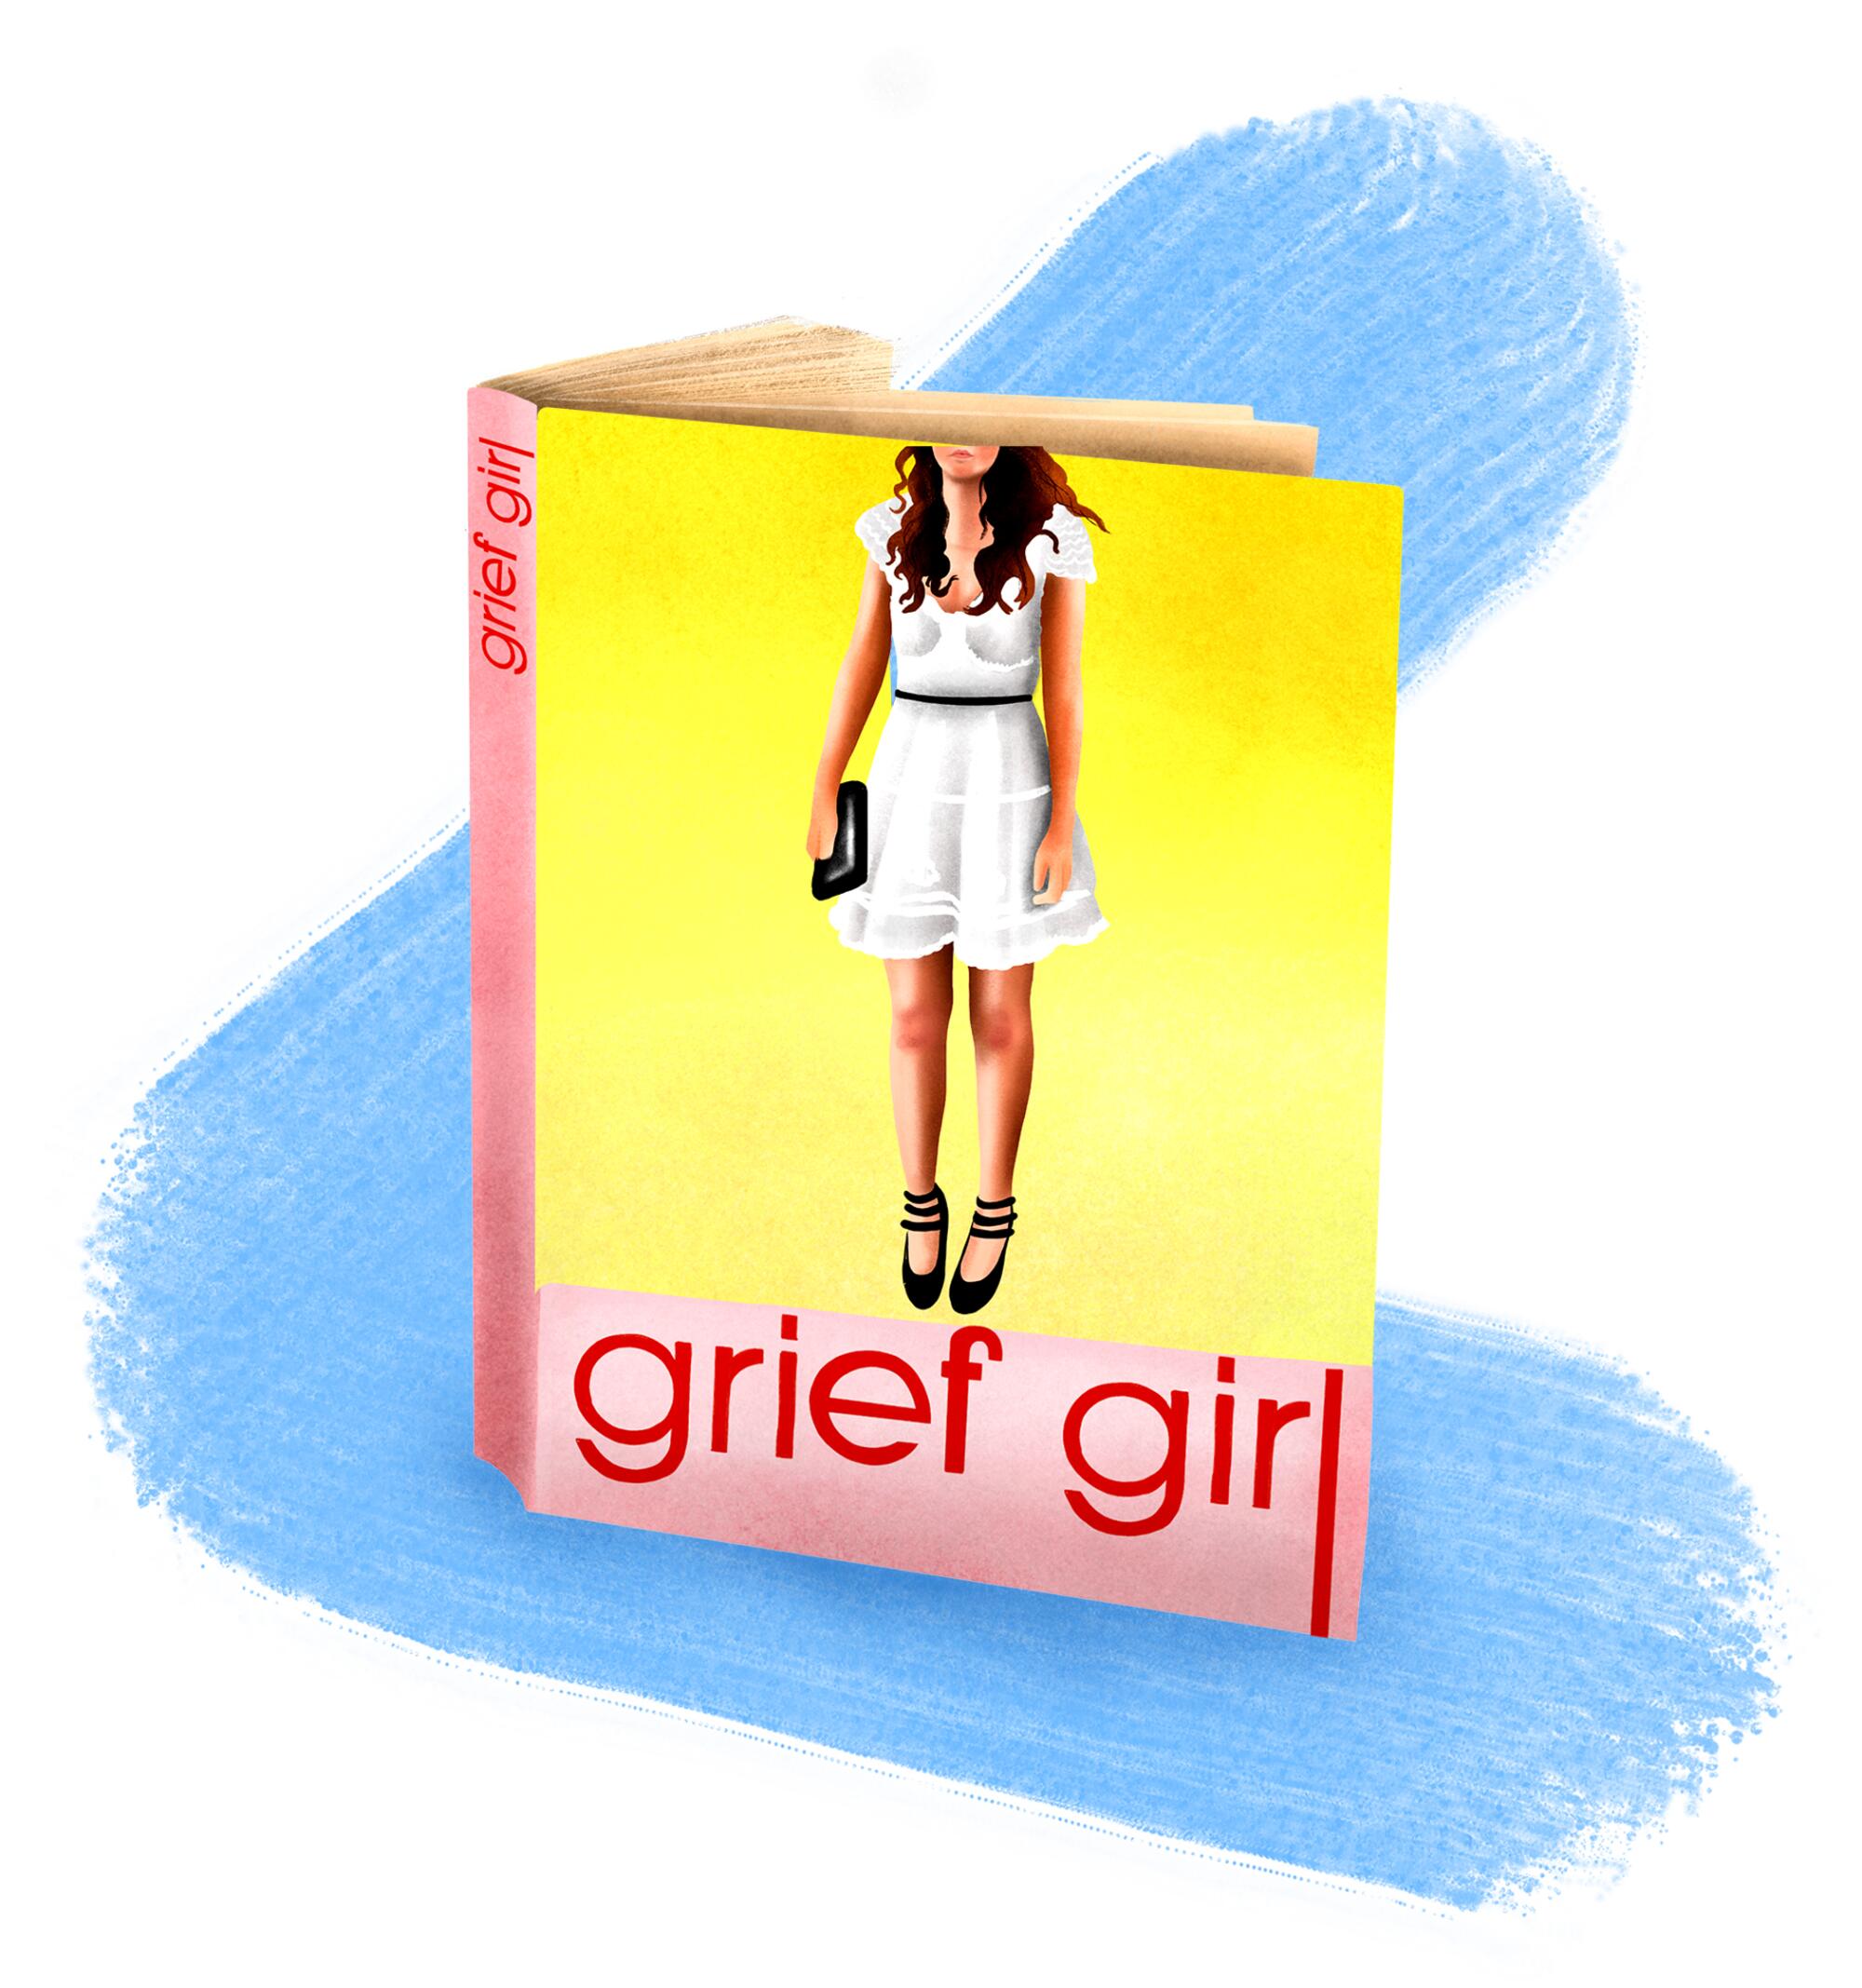 Illustration of a book titled “Grief Girl” with Sarah Ramos on the cover.